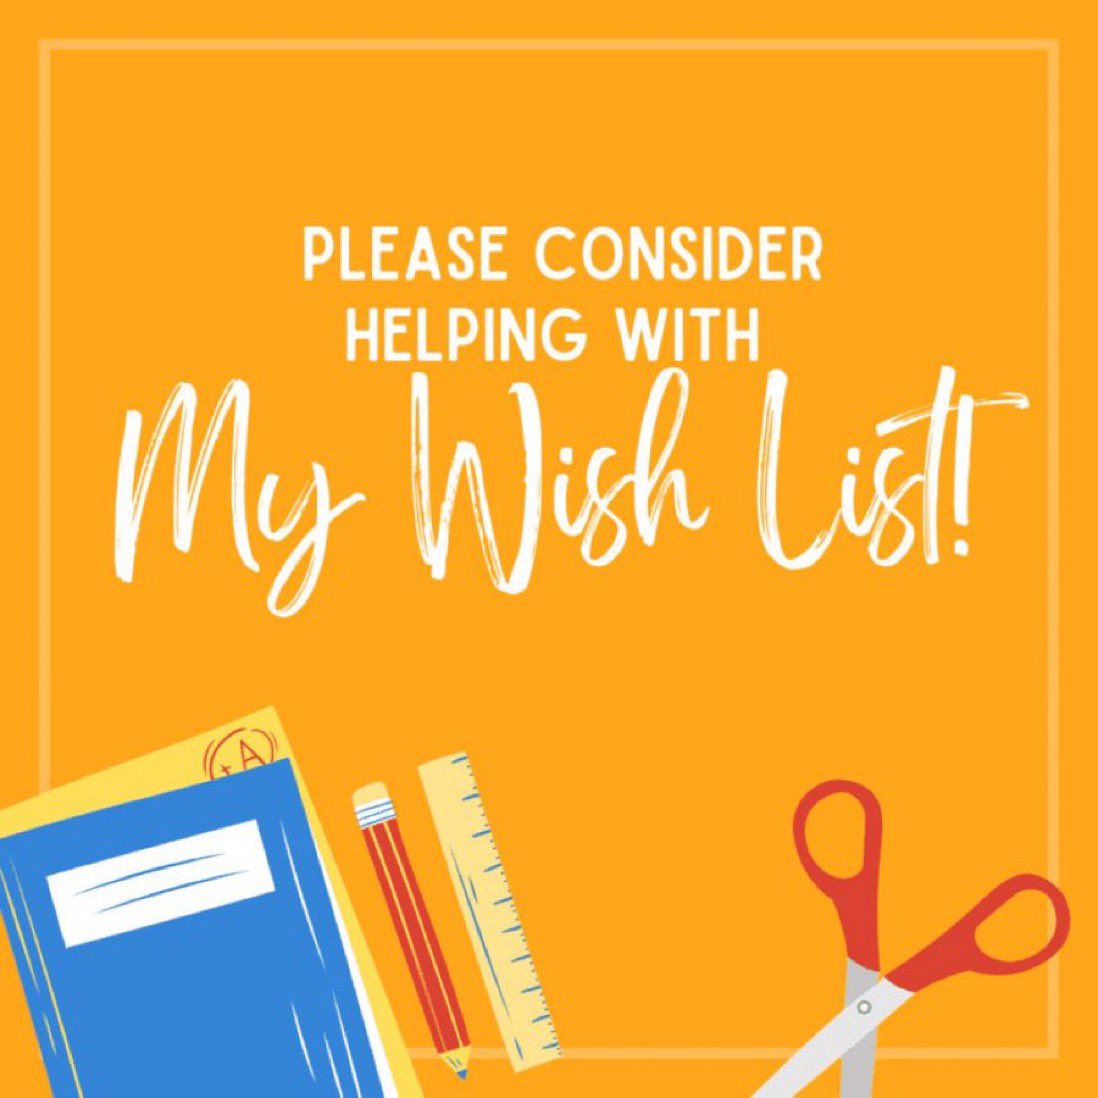 🍎 20 year high school teacher in SC

✨ I’d REALLY appreciate any help with my list. My student and I would like to thank you in advance.  ✨

amazon.com/hz/wishlist/ls…

Thank you ❤️ #teachersoftwitter #clearmylist
#clearthelist2023 #highschooleducator
#helpateacher